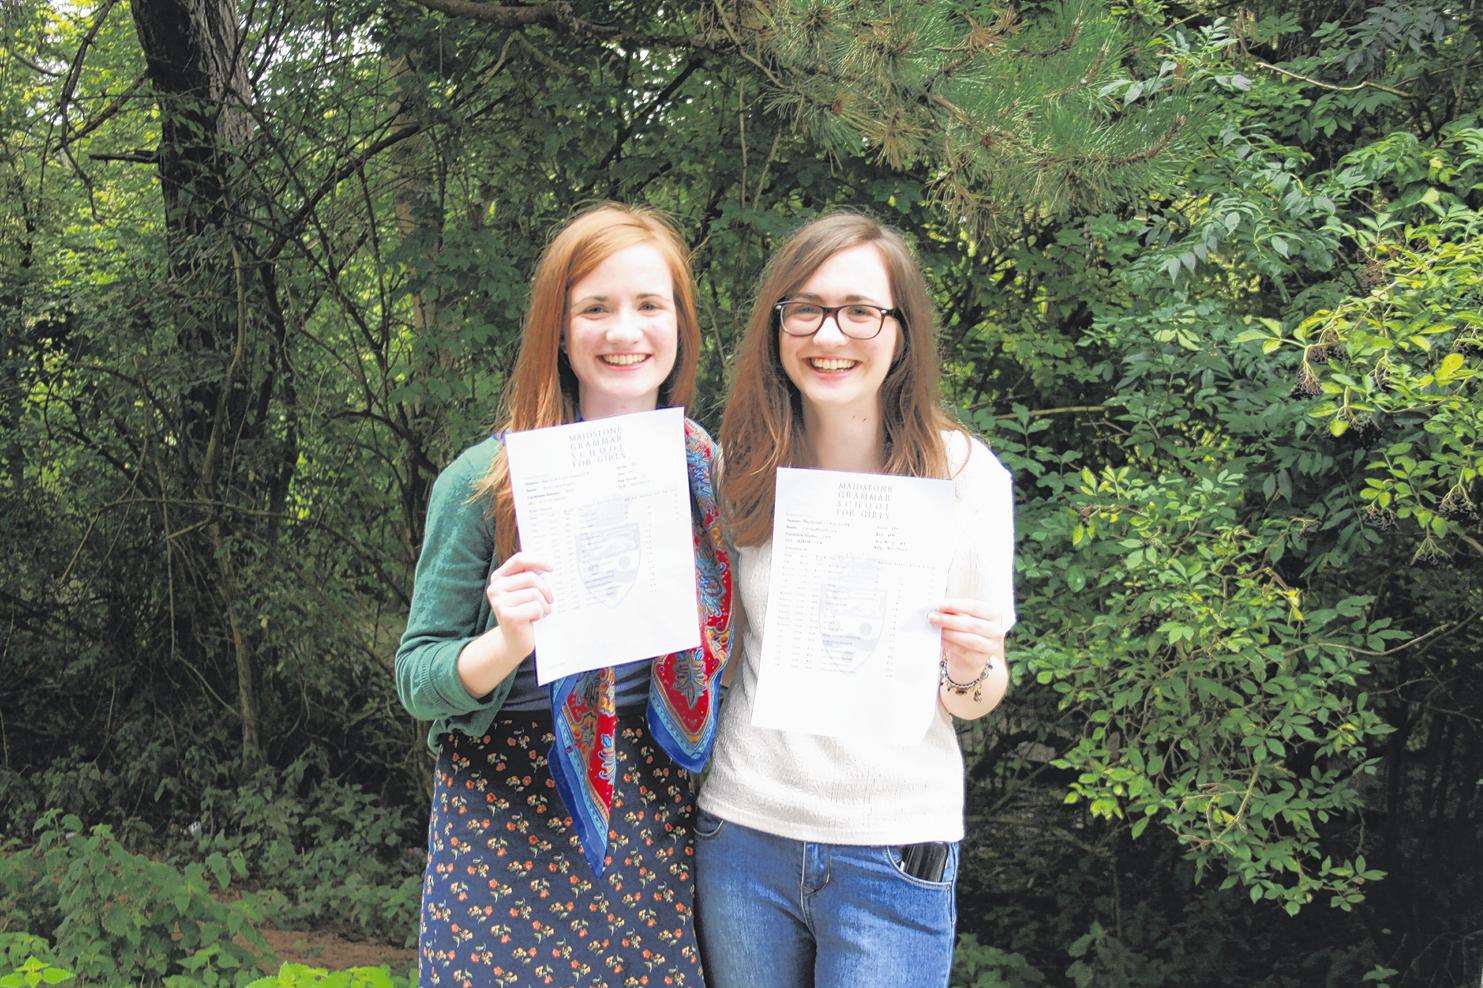 Twins Alice (left) and Carolyn (right) Rogers, pupils at Maidstone Grammar School for Girls, achieved eight A* grades between them.